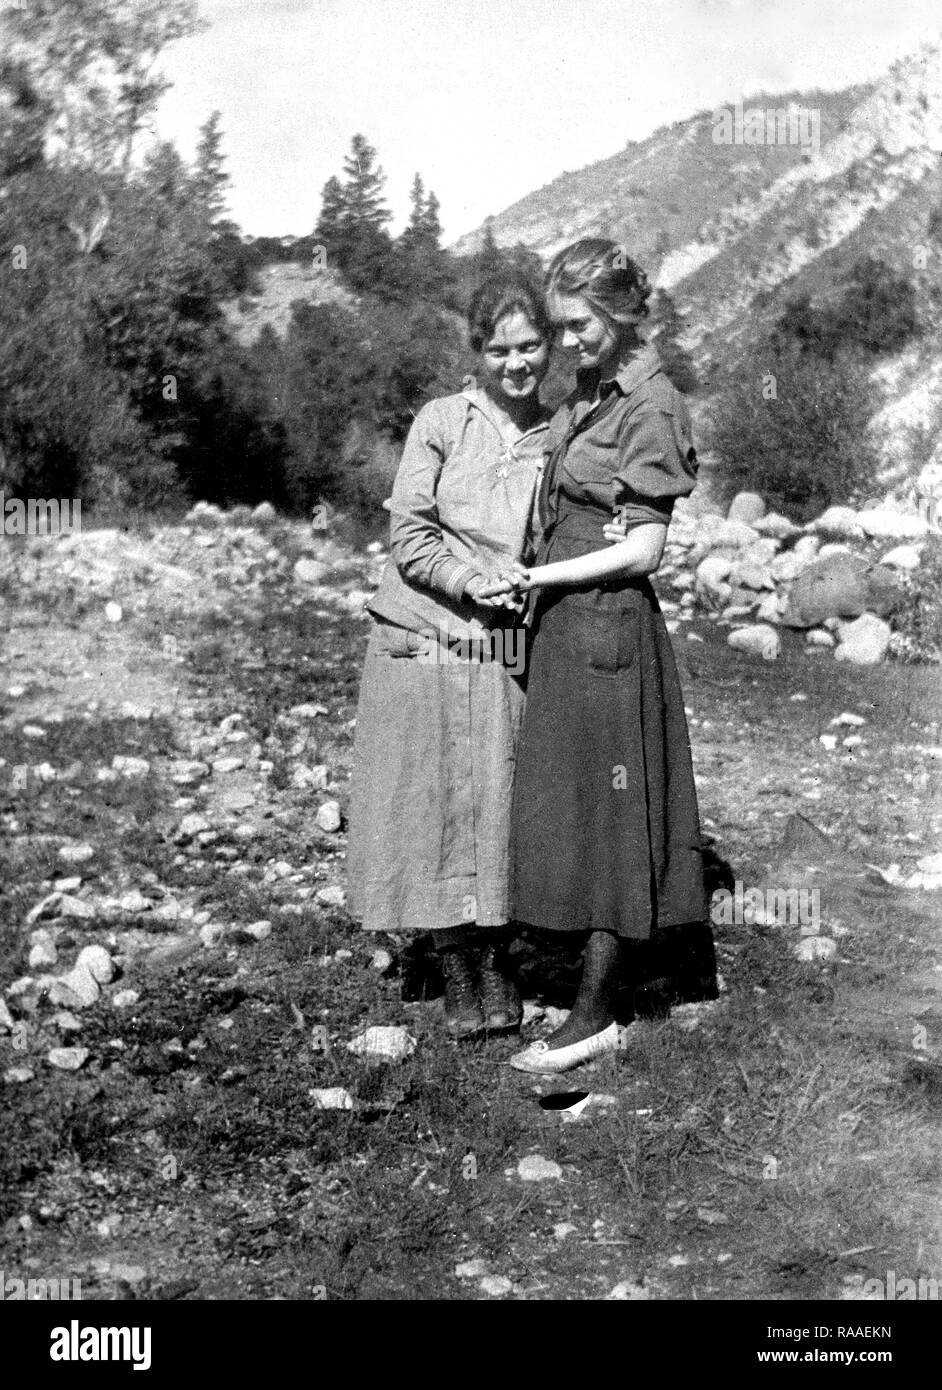 Two young women pose together holding hands in Colorado, ca. 1925. Stock Photo